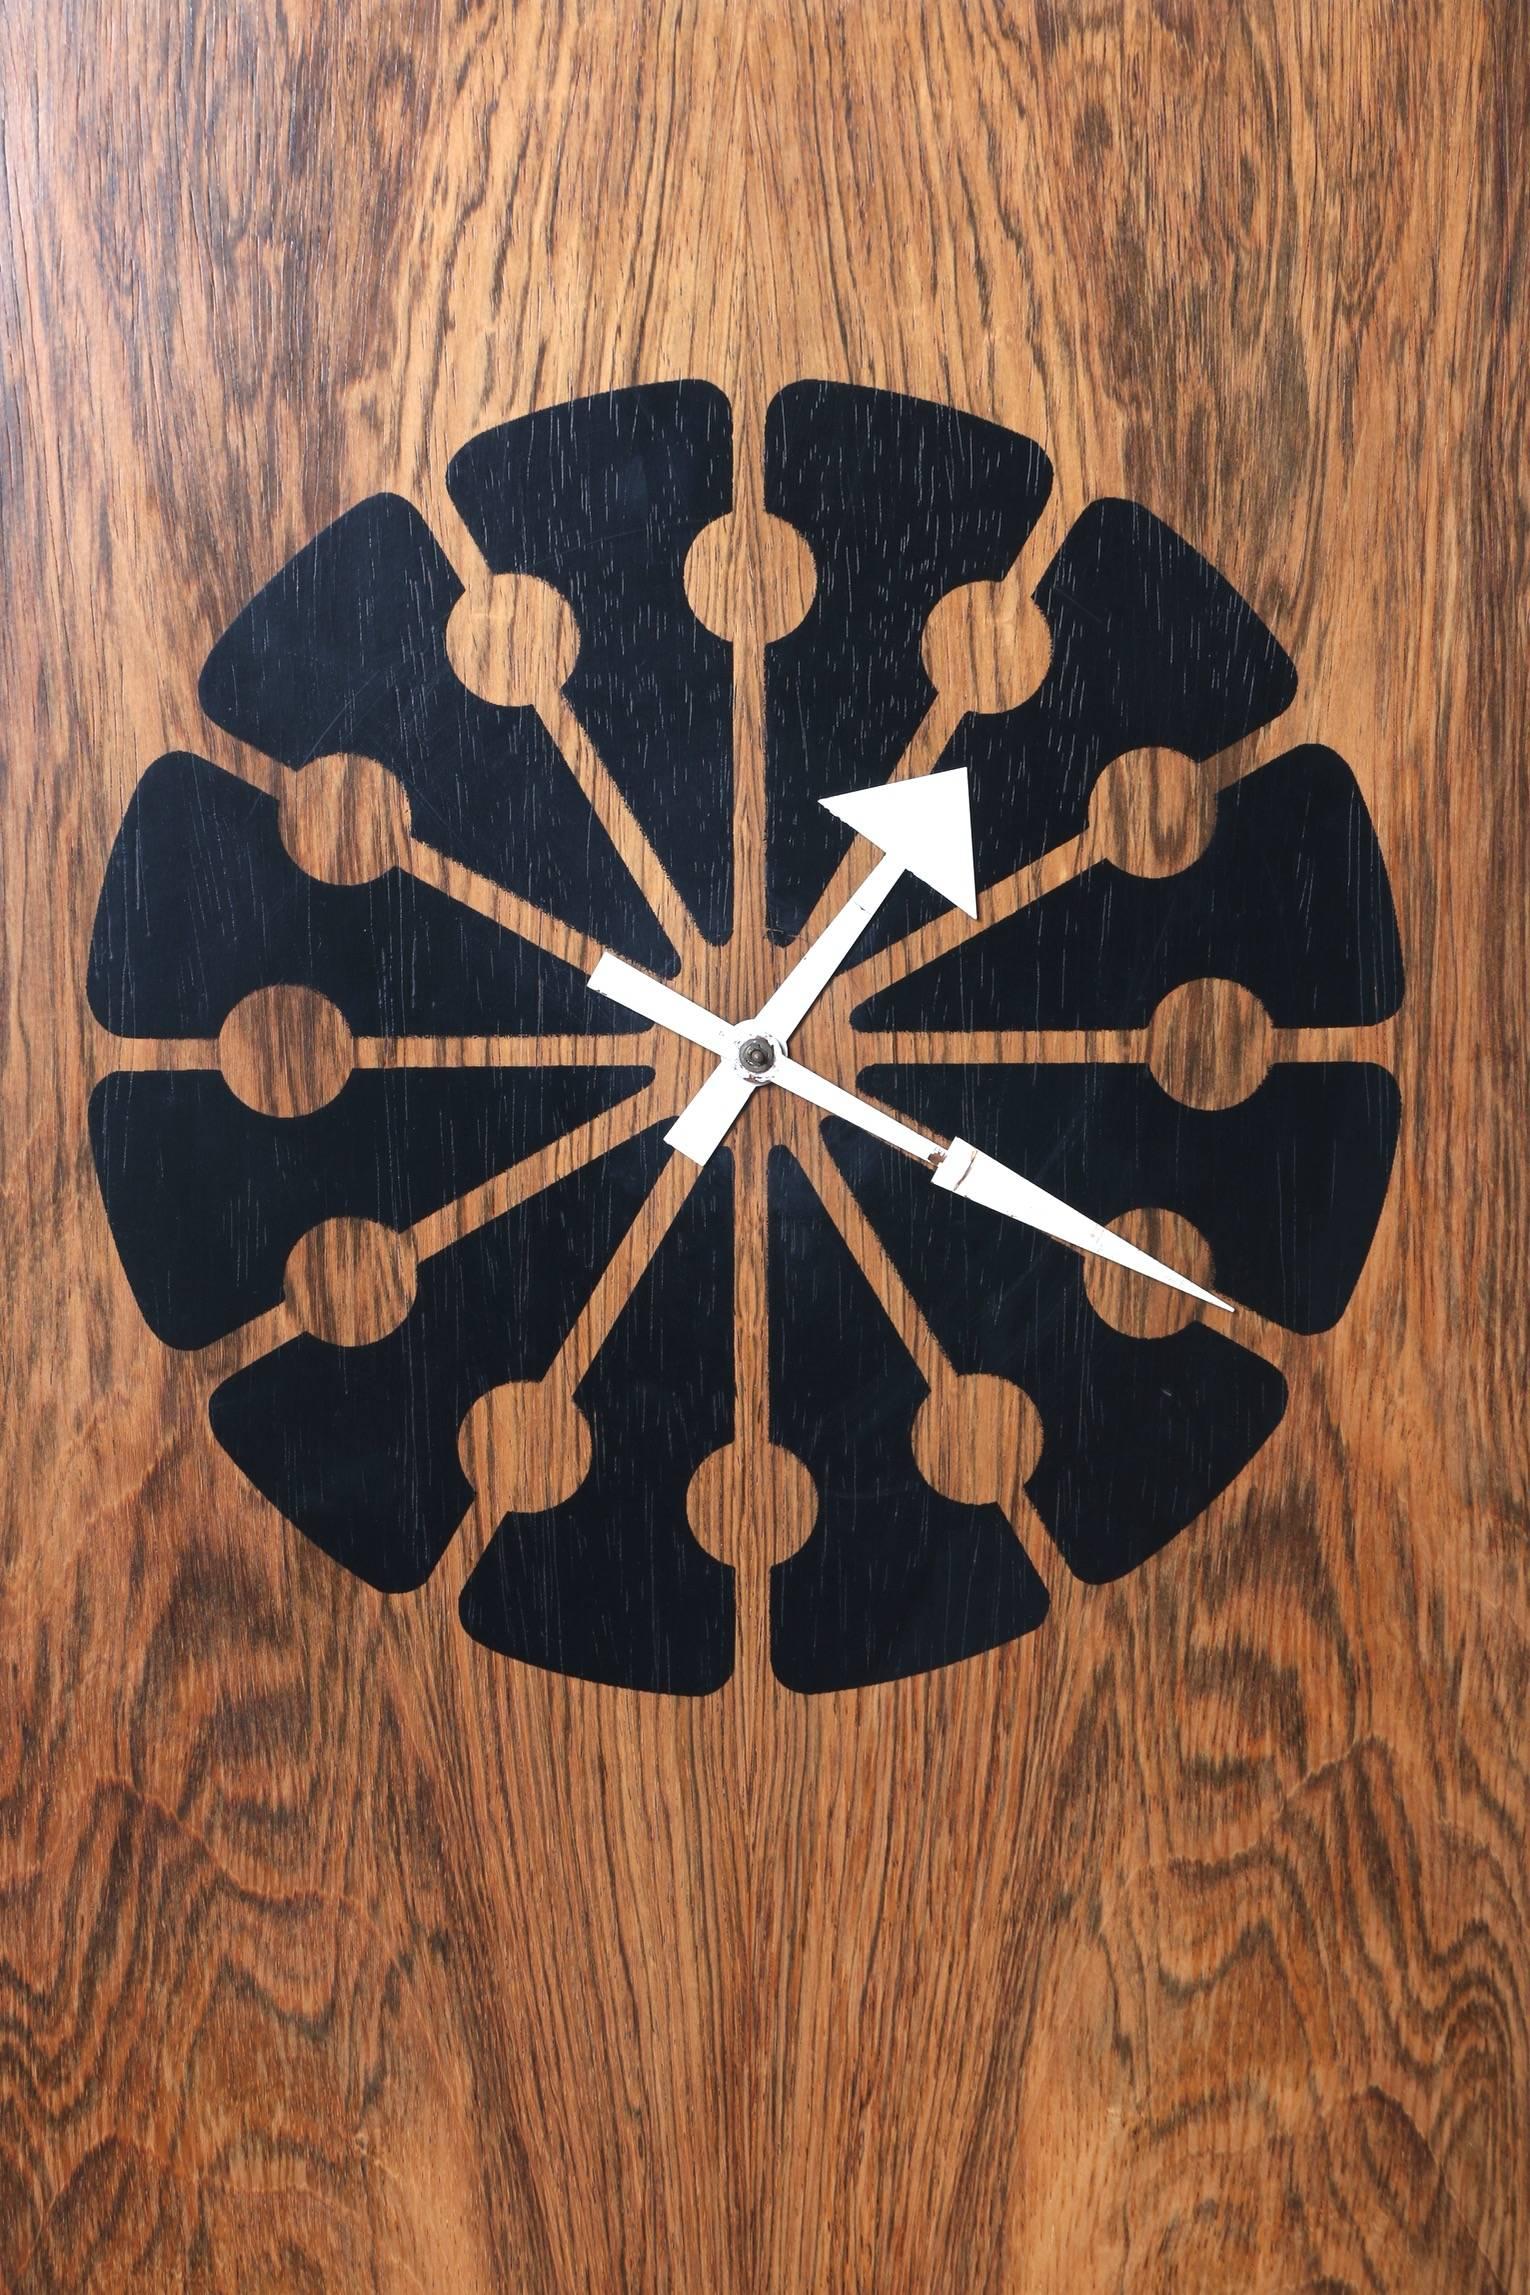 Drexel Declaration Floor Clock, Rosewood, 1963
This rosewood floor clock offers a modernist twist to the traditional grandfather clock. The striking presence, gorgeous wood grain and exciting graphic offers the decorator and end user a functional